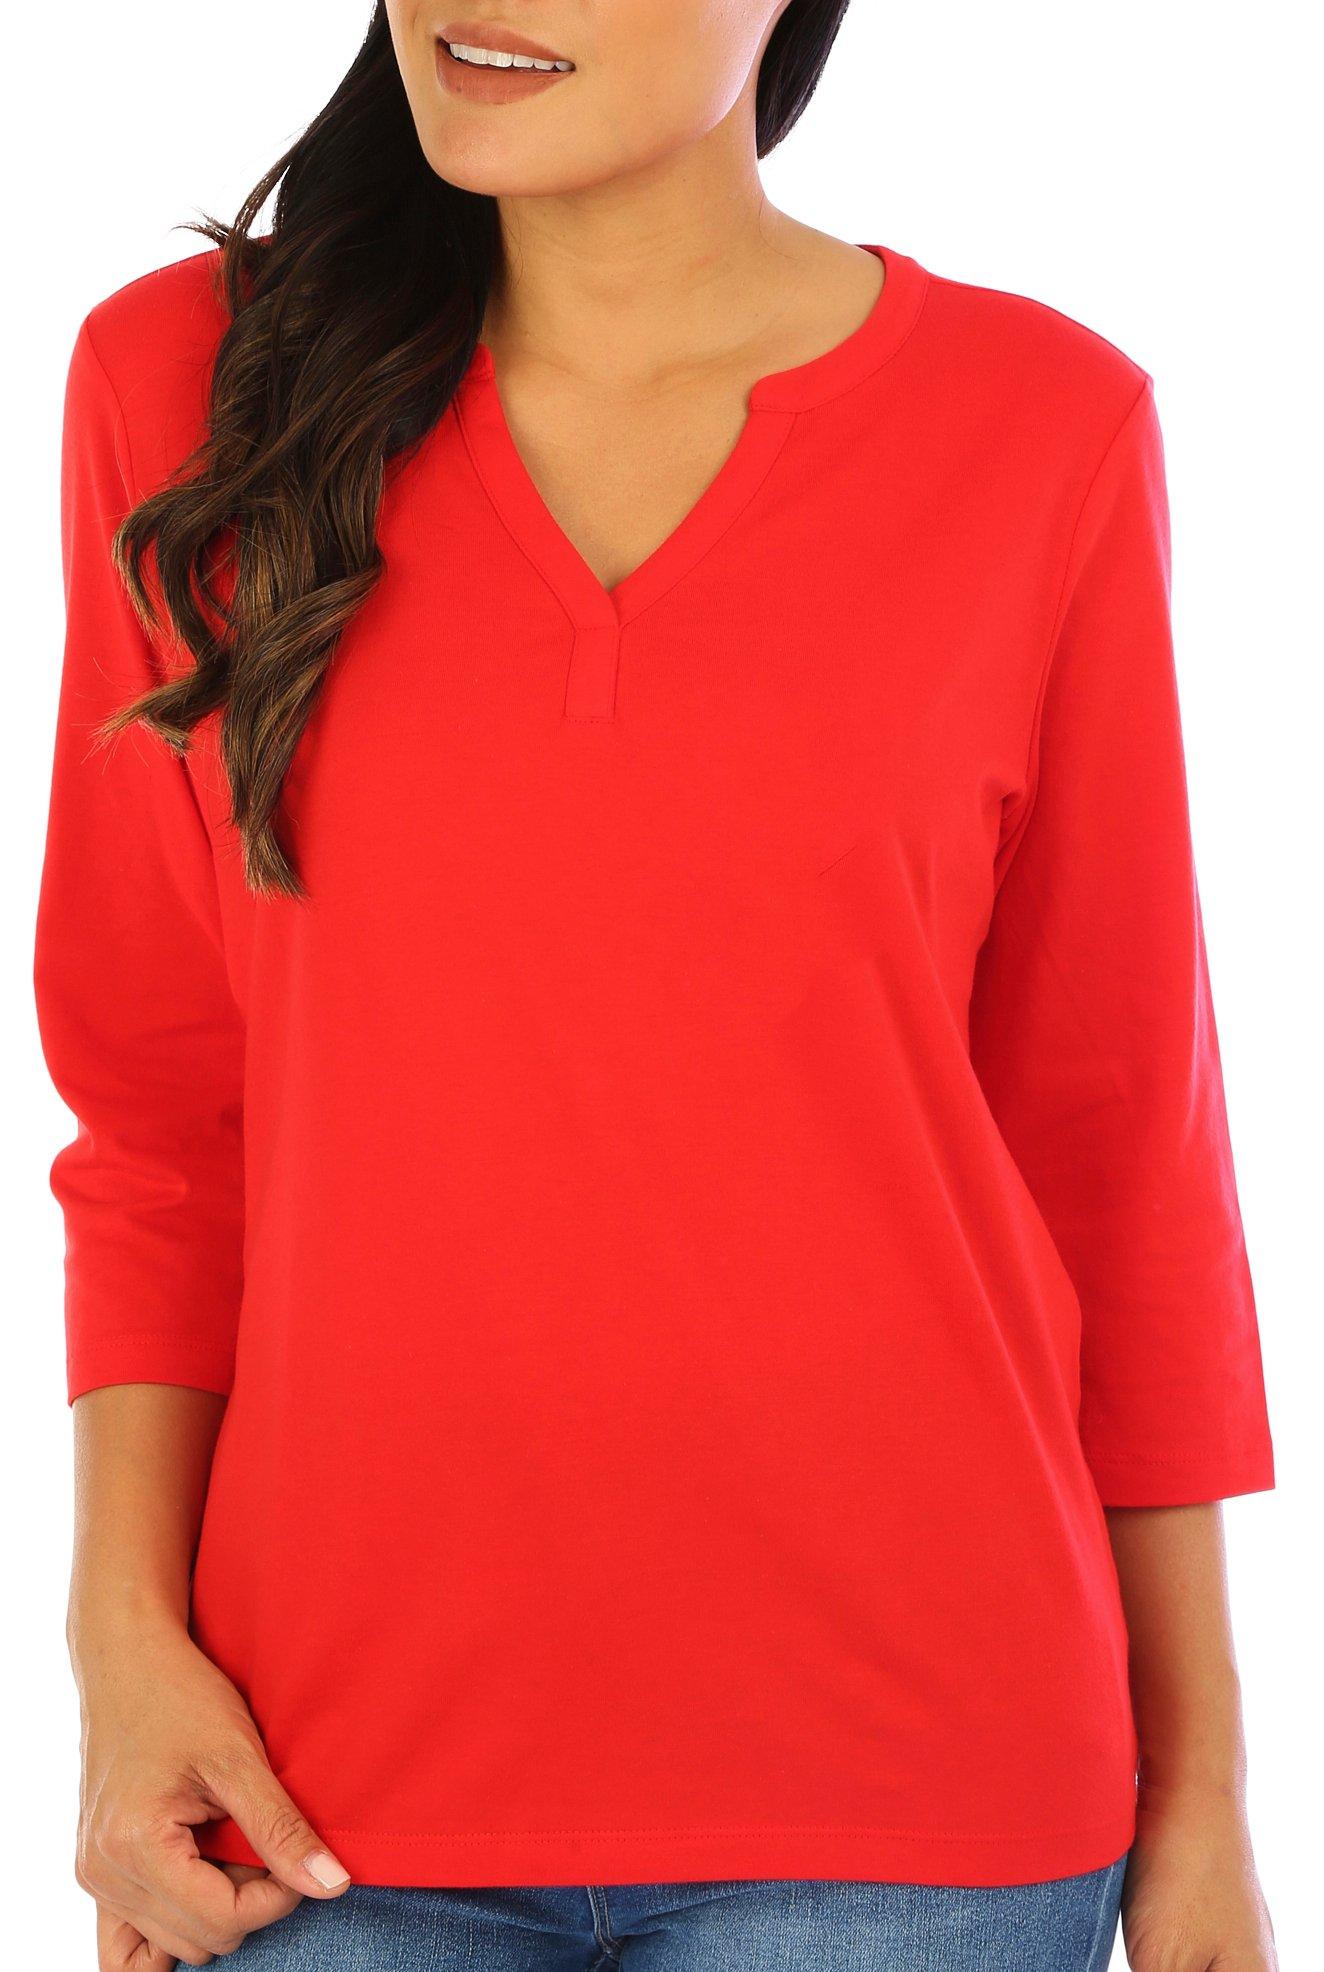 Coral Bay Petite Solid 3/4 Sleeve Top